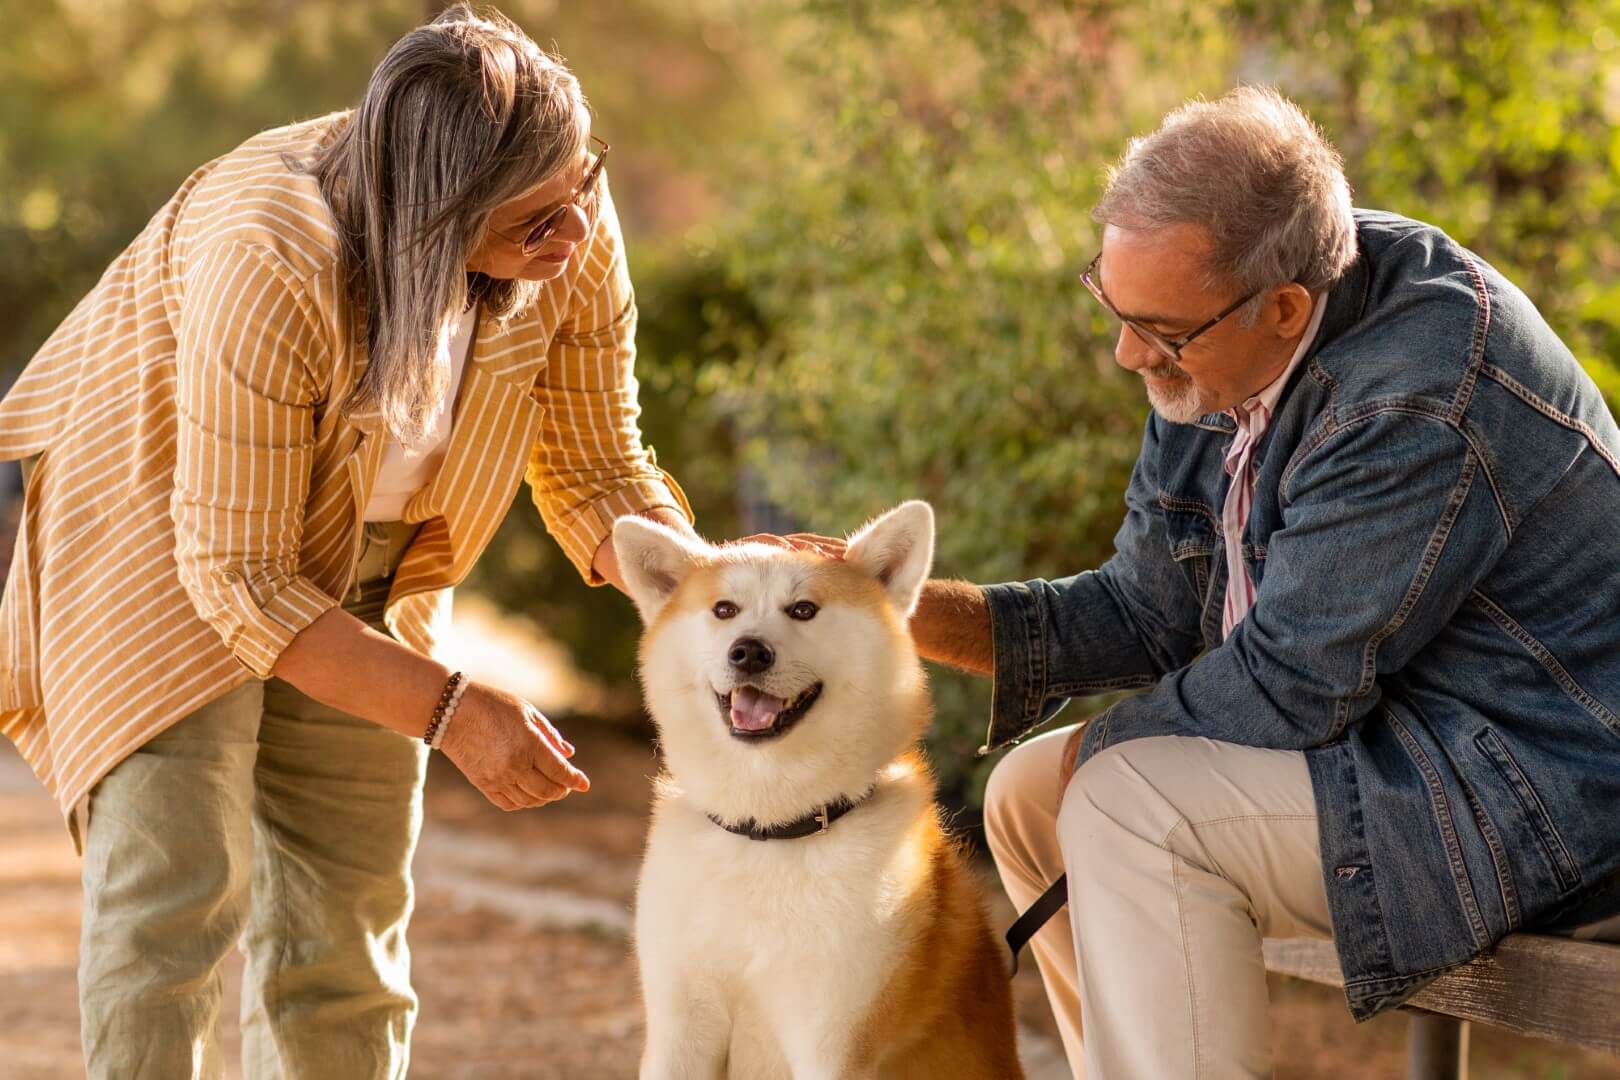 The benefits of having a pet during retirement